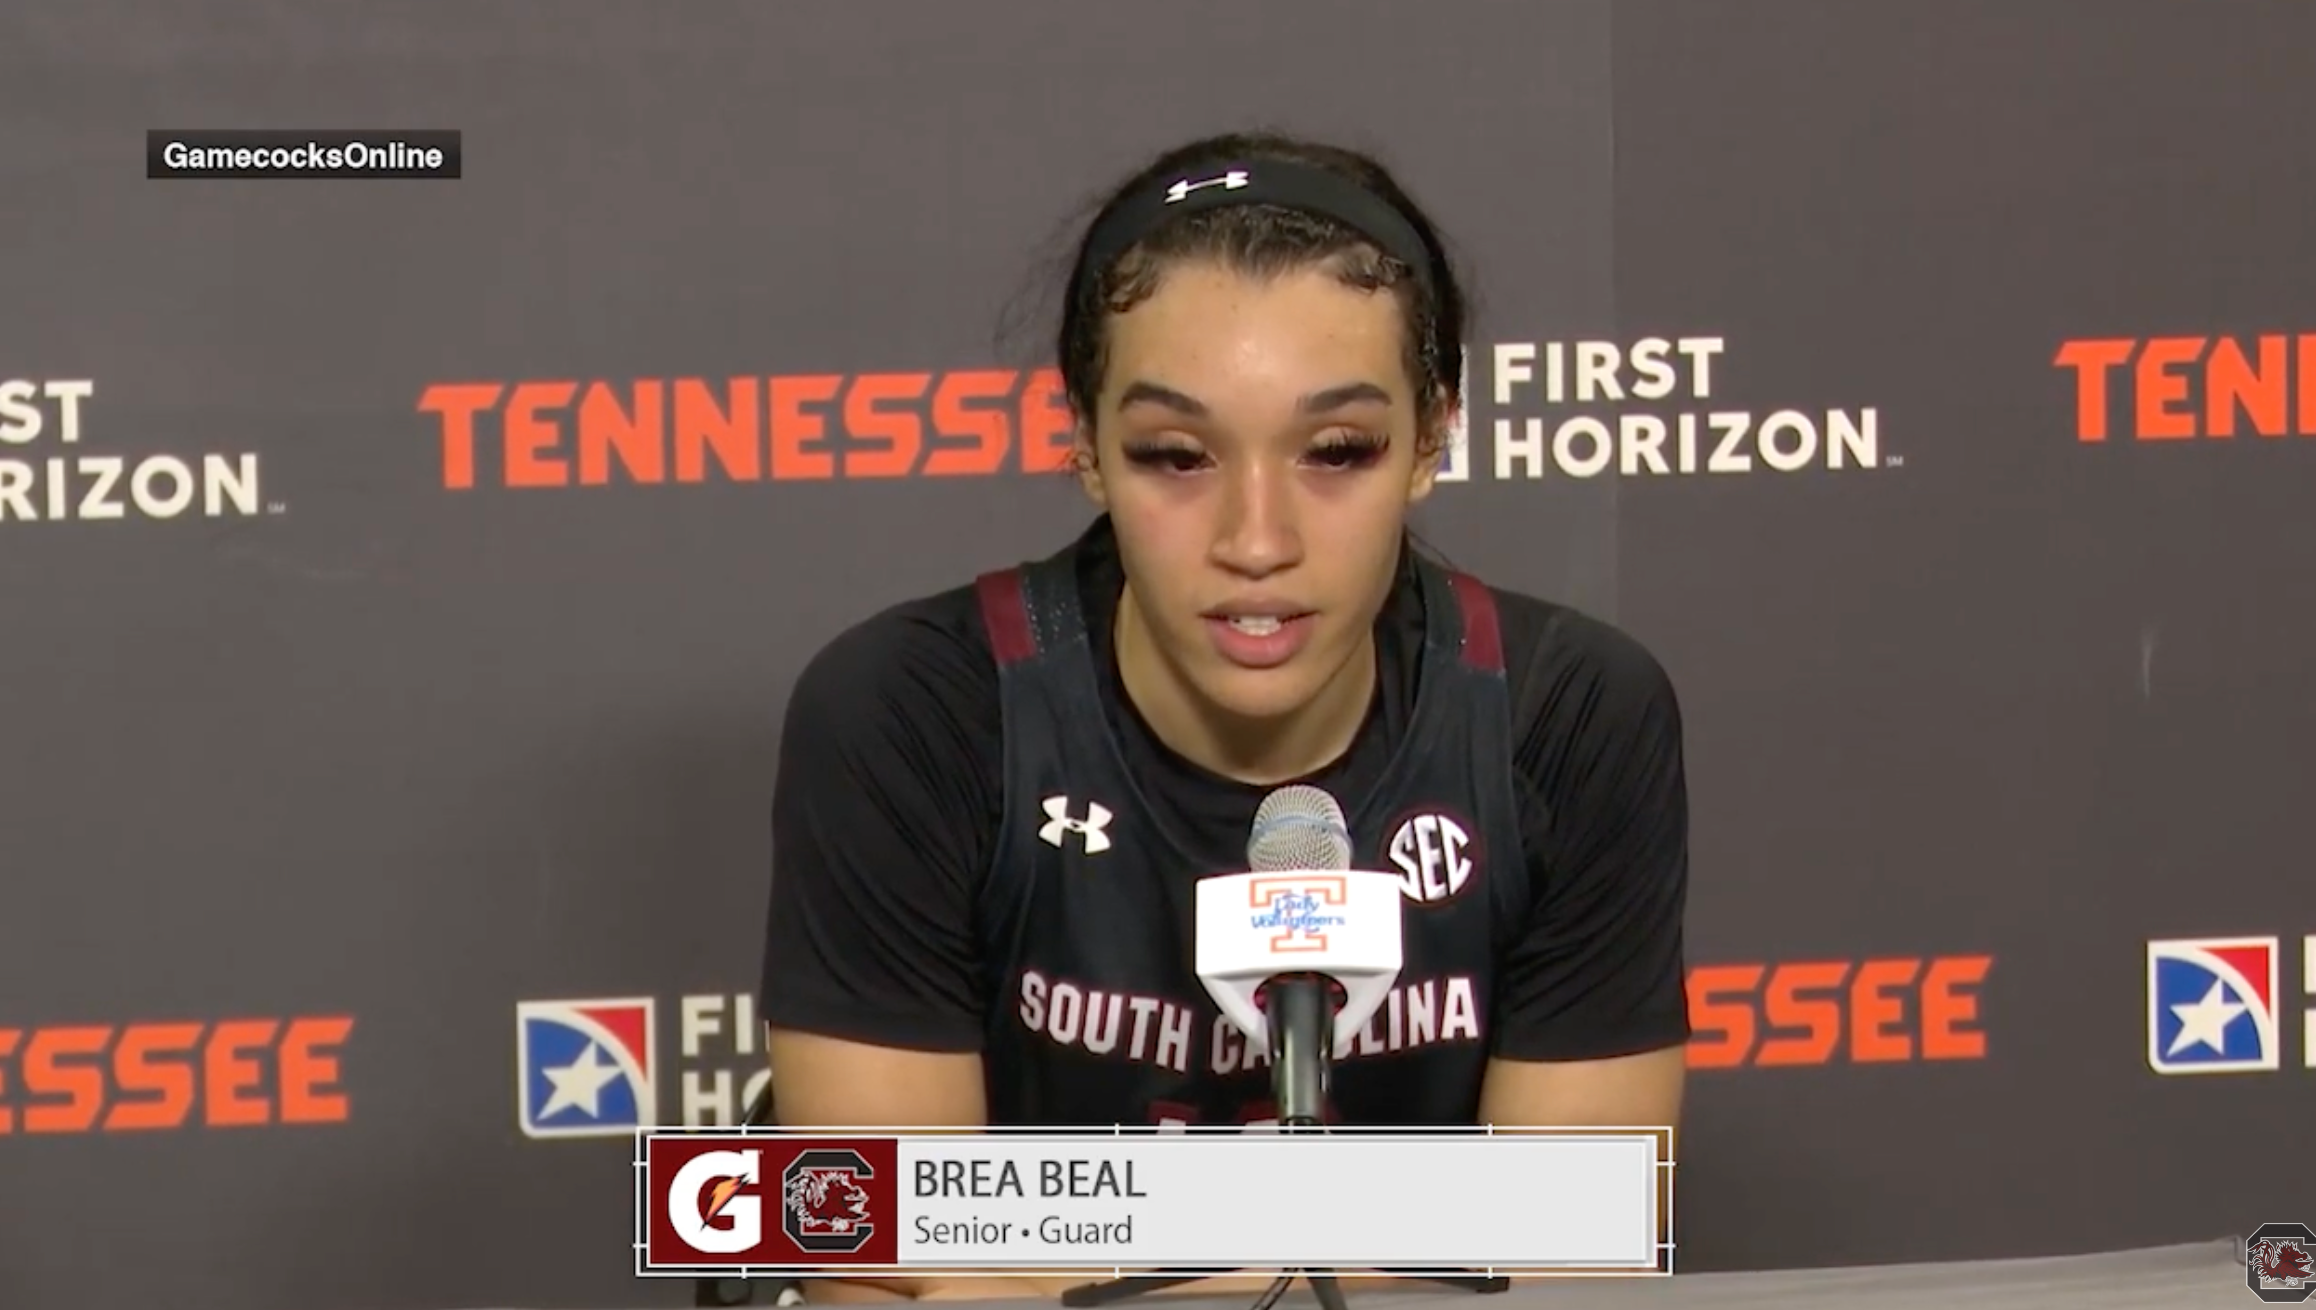 Postgame Press Conference: Tennessee - Brea Beal